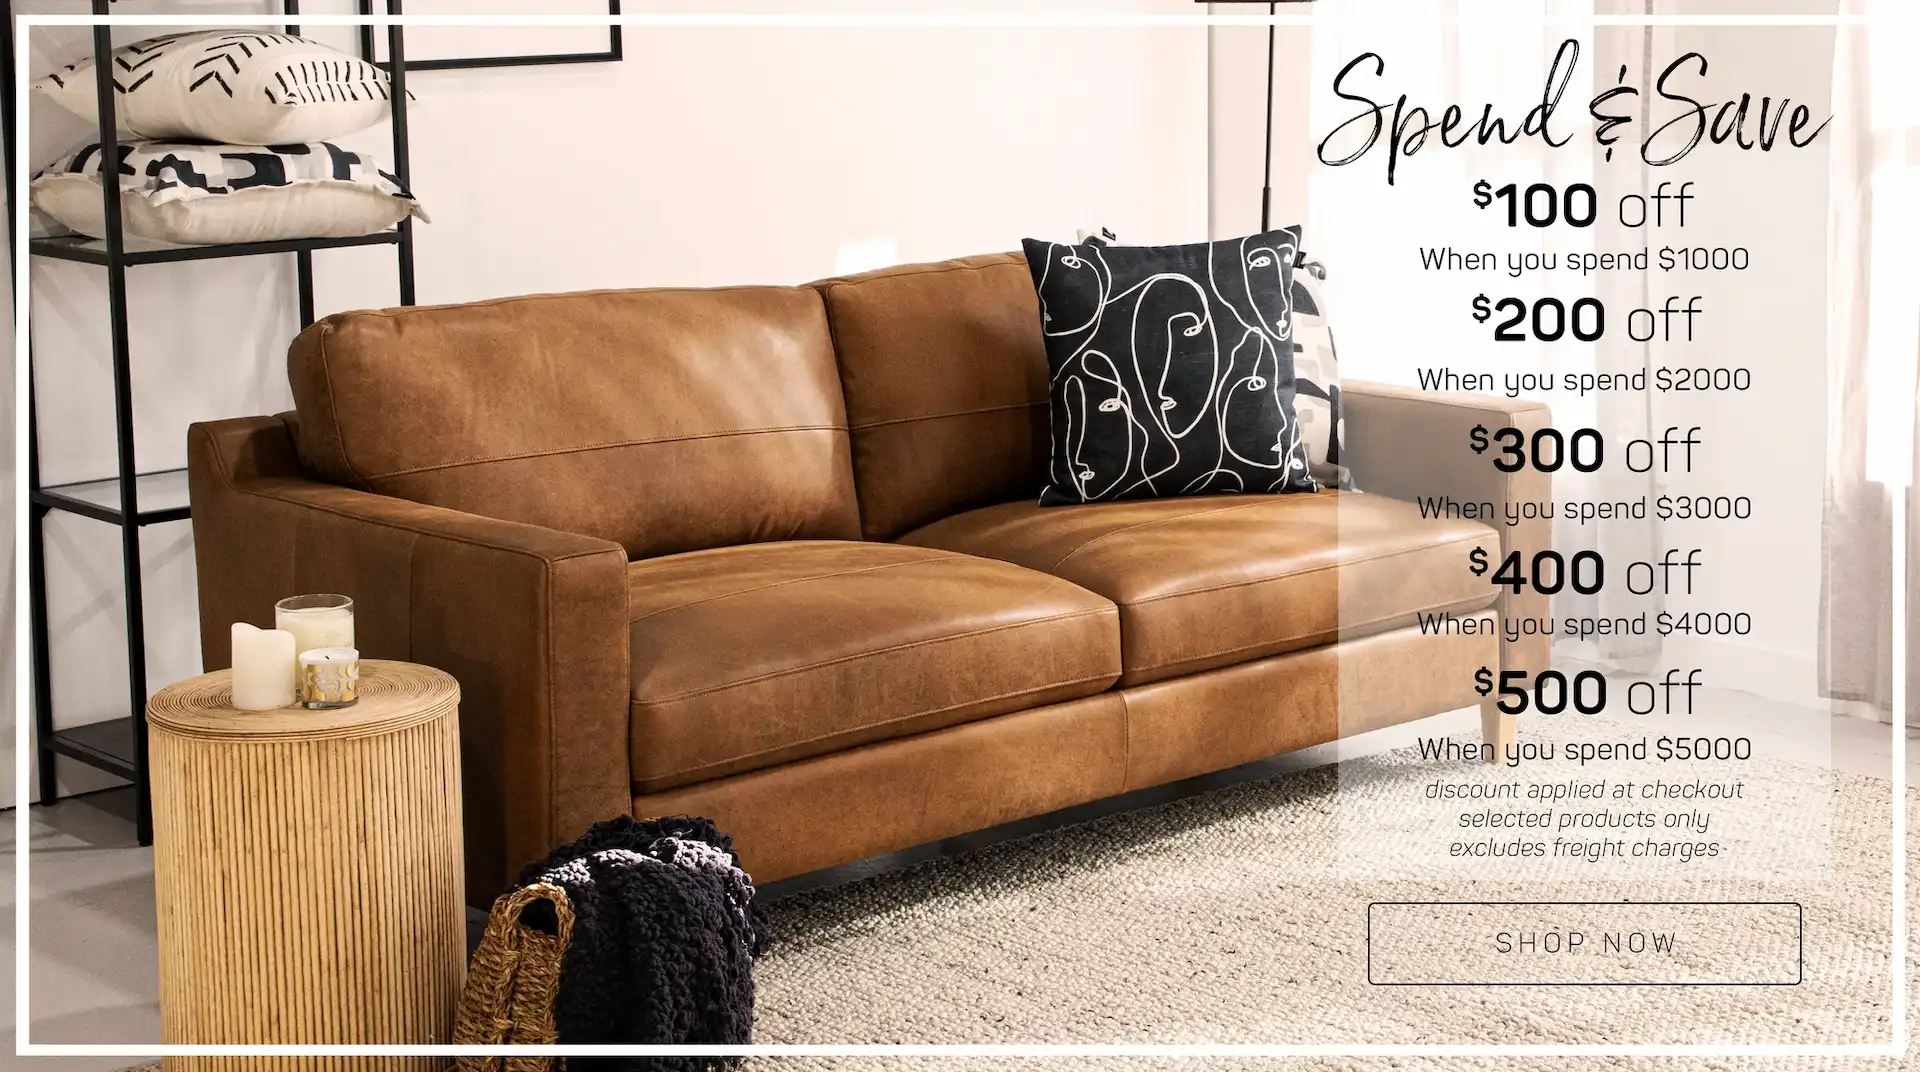 Spend & save up to $500 OFF at Secretsofa (selected products)